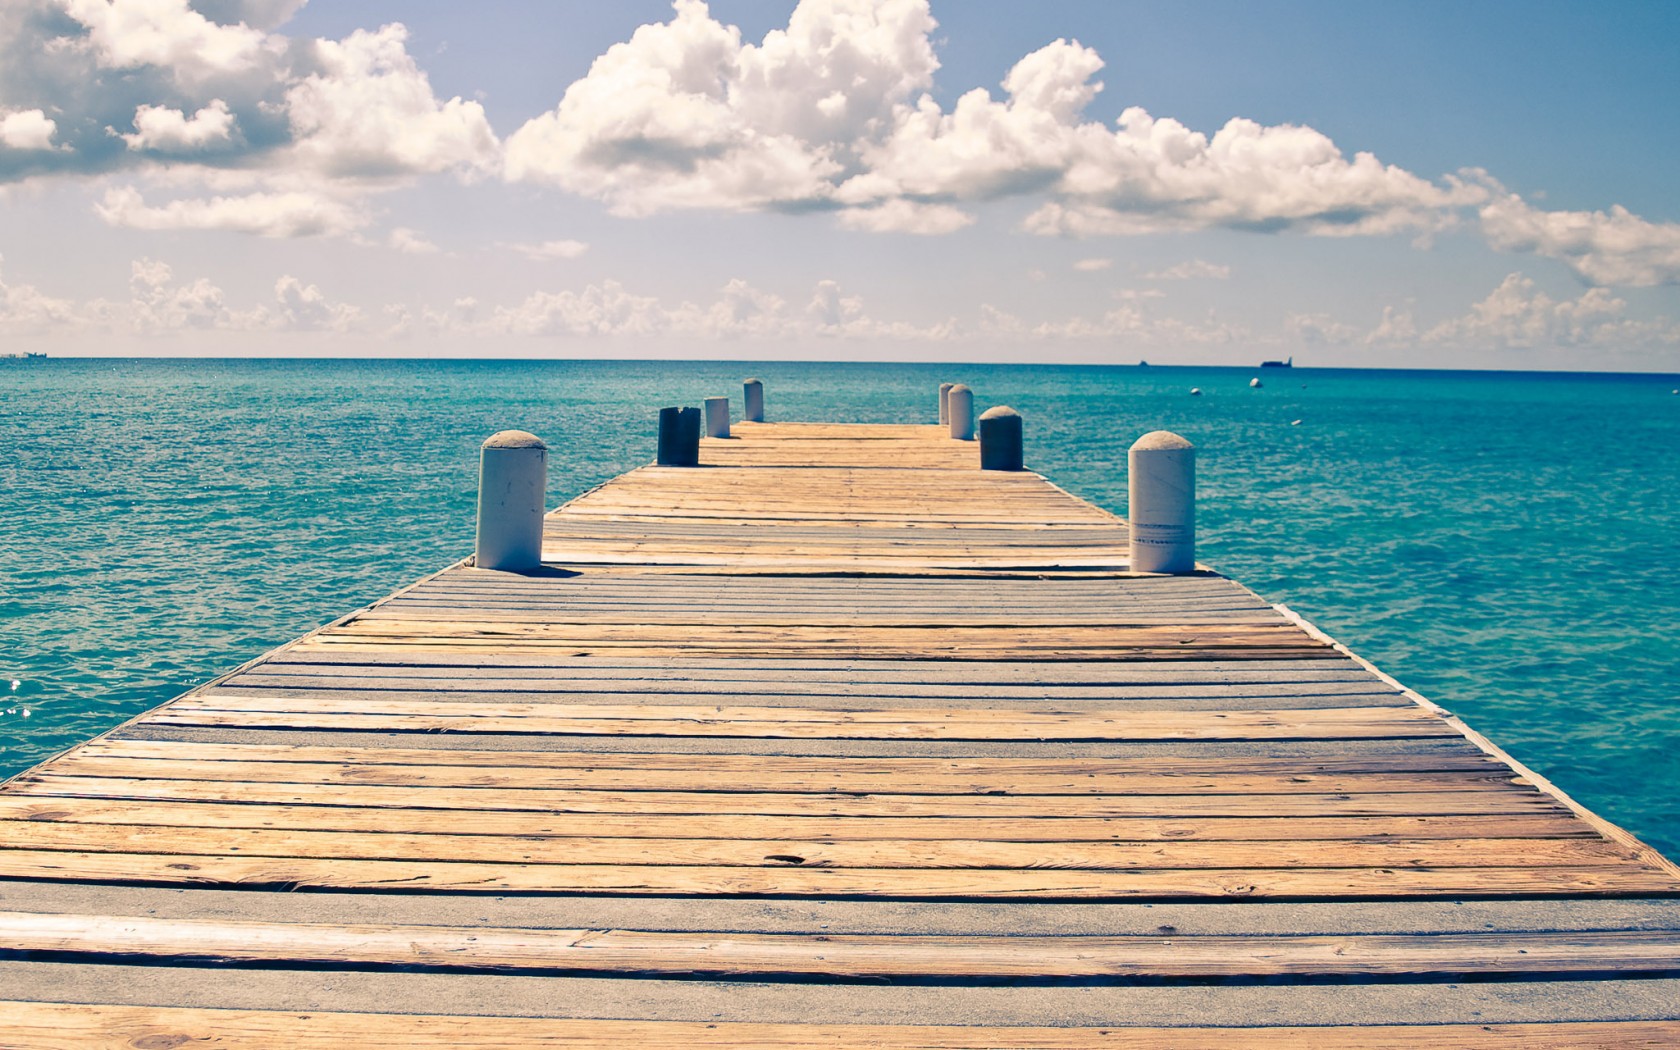 60+ Pier wallpapers HD | Download Free backgrounds